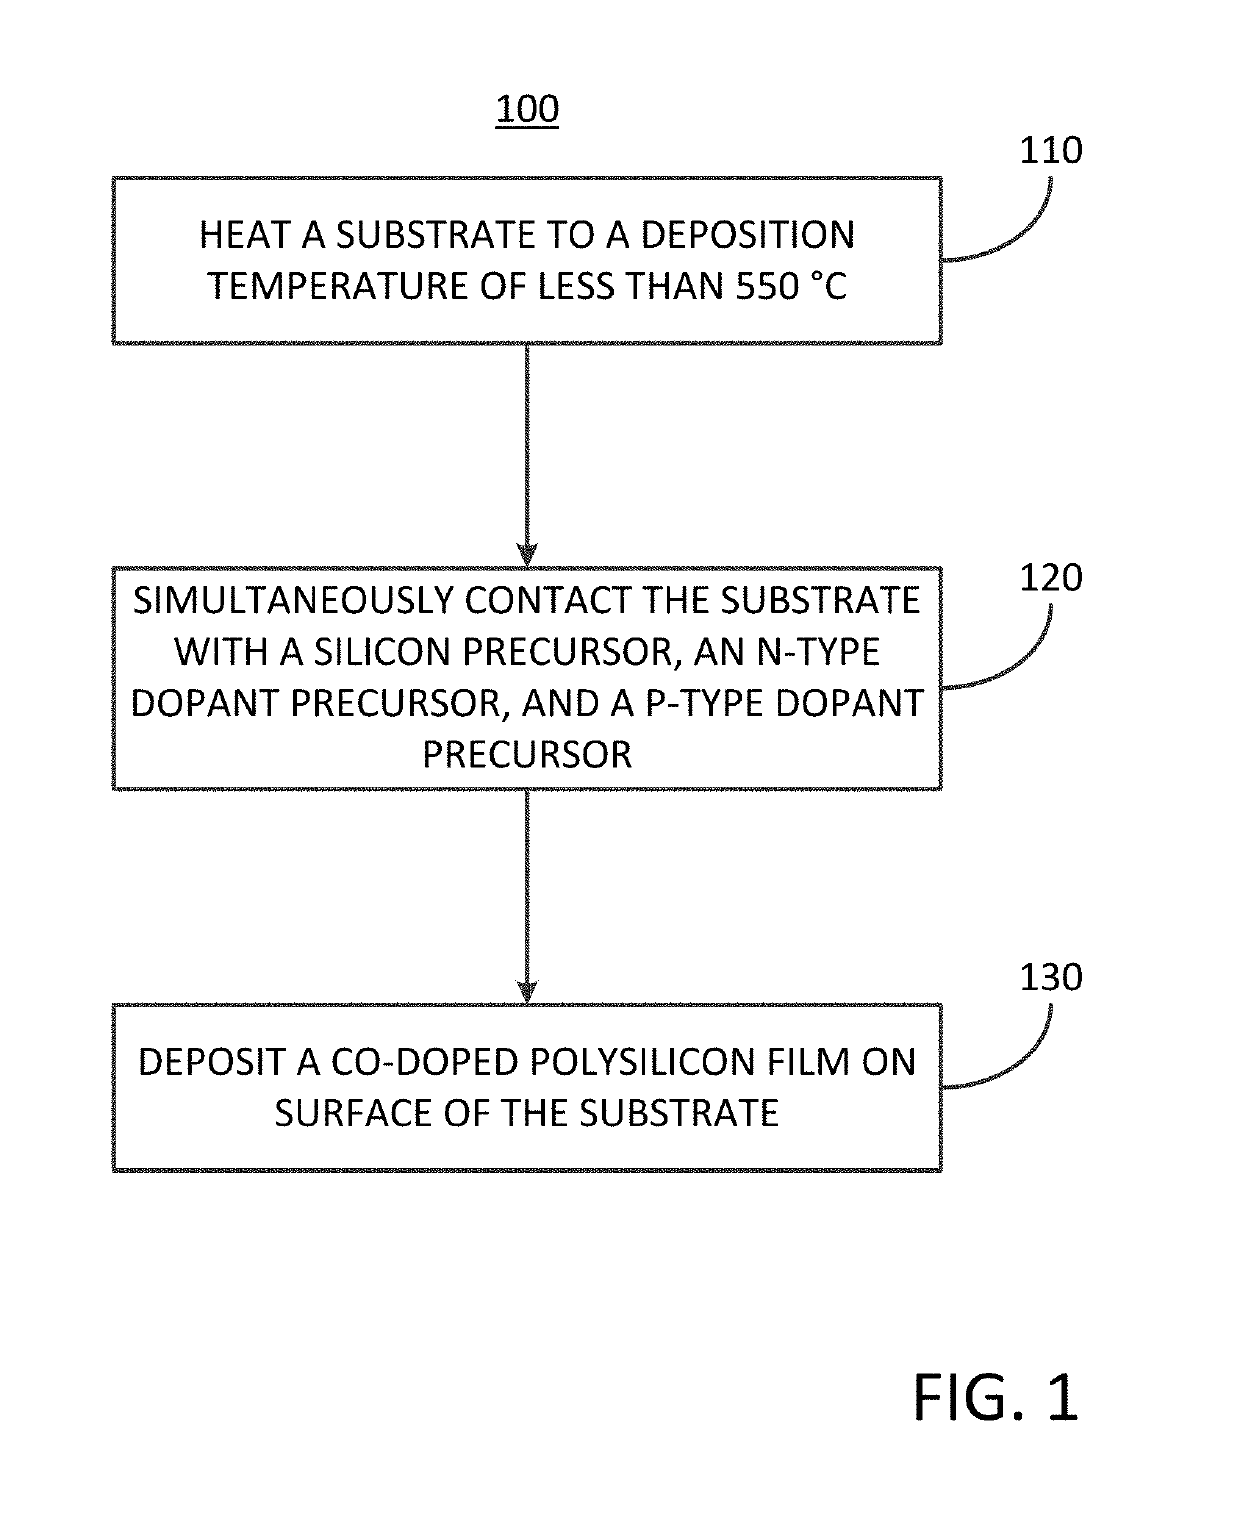 Method of depositing a co-doped polysilicon film on a surface of a substrate within a reaction chamber